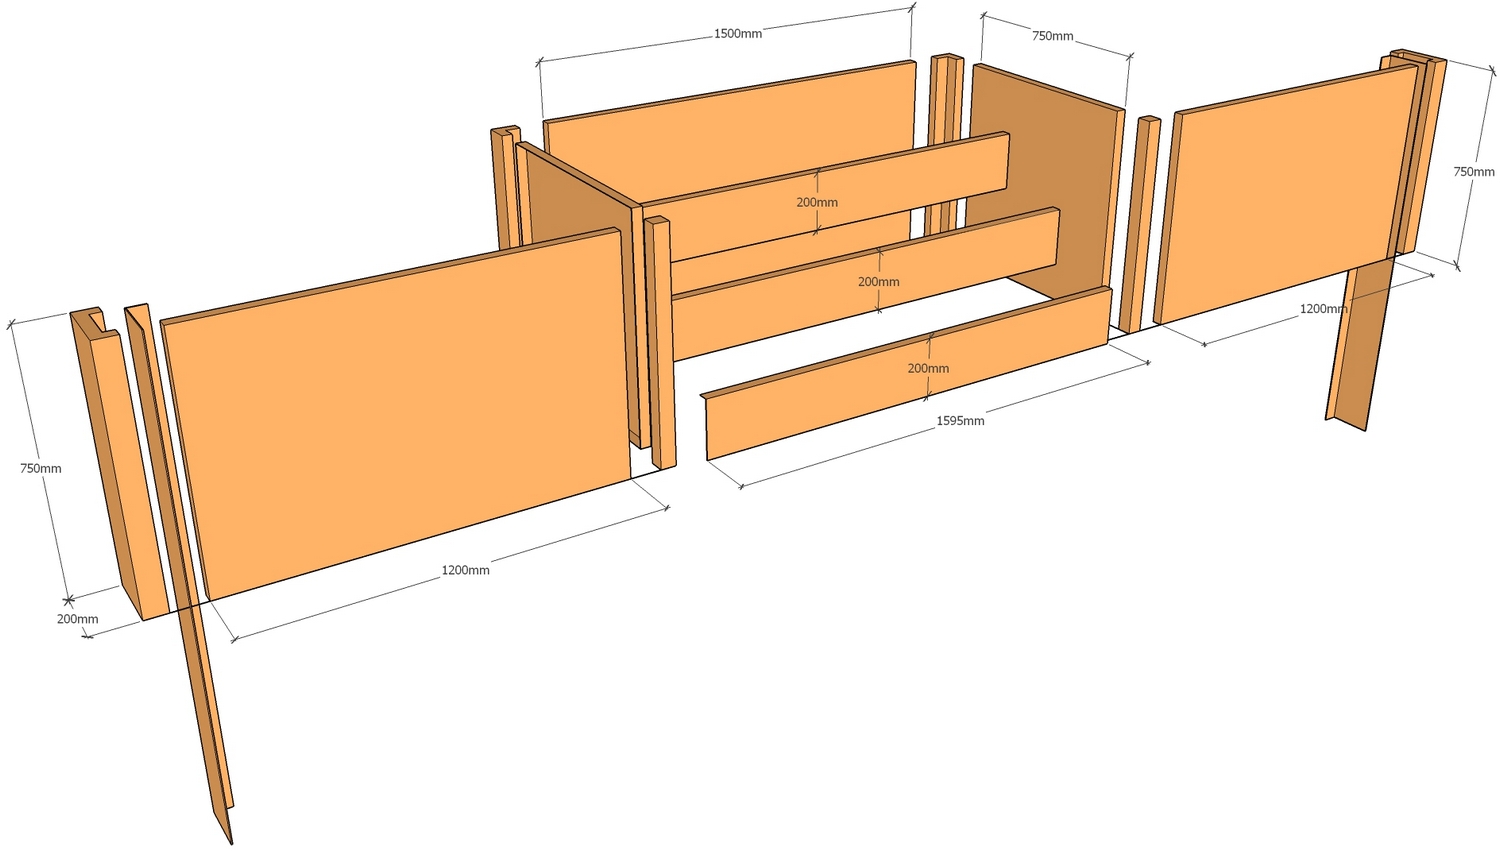 corten retaining wall layout with steps 4.23m wide x 750mm tall